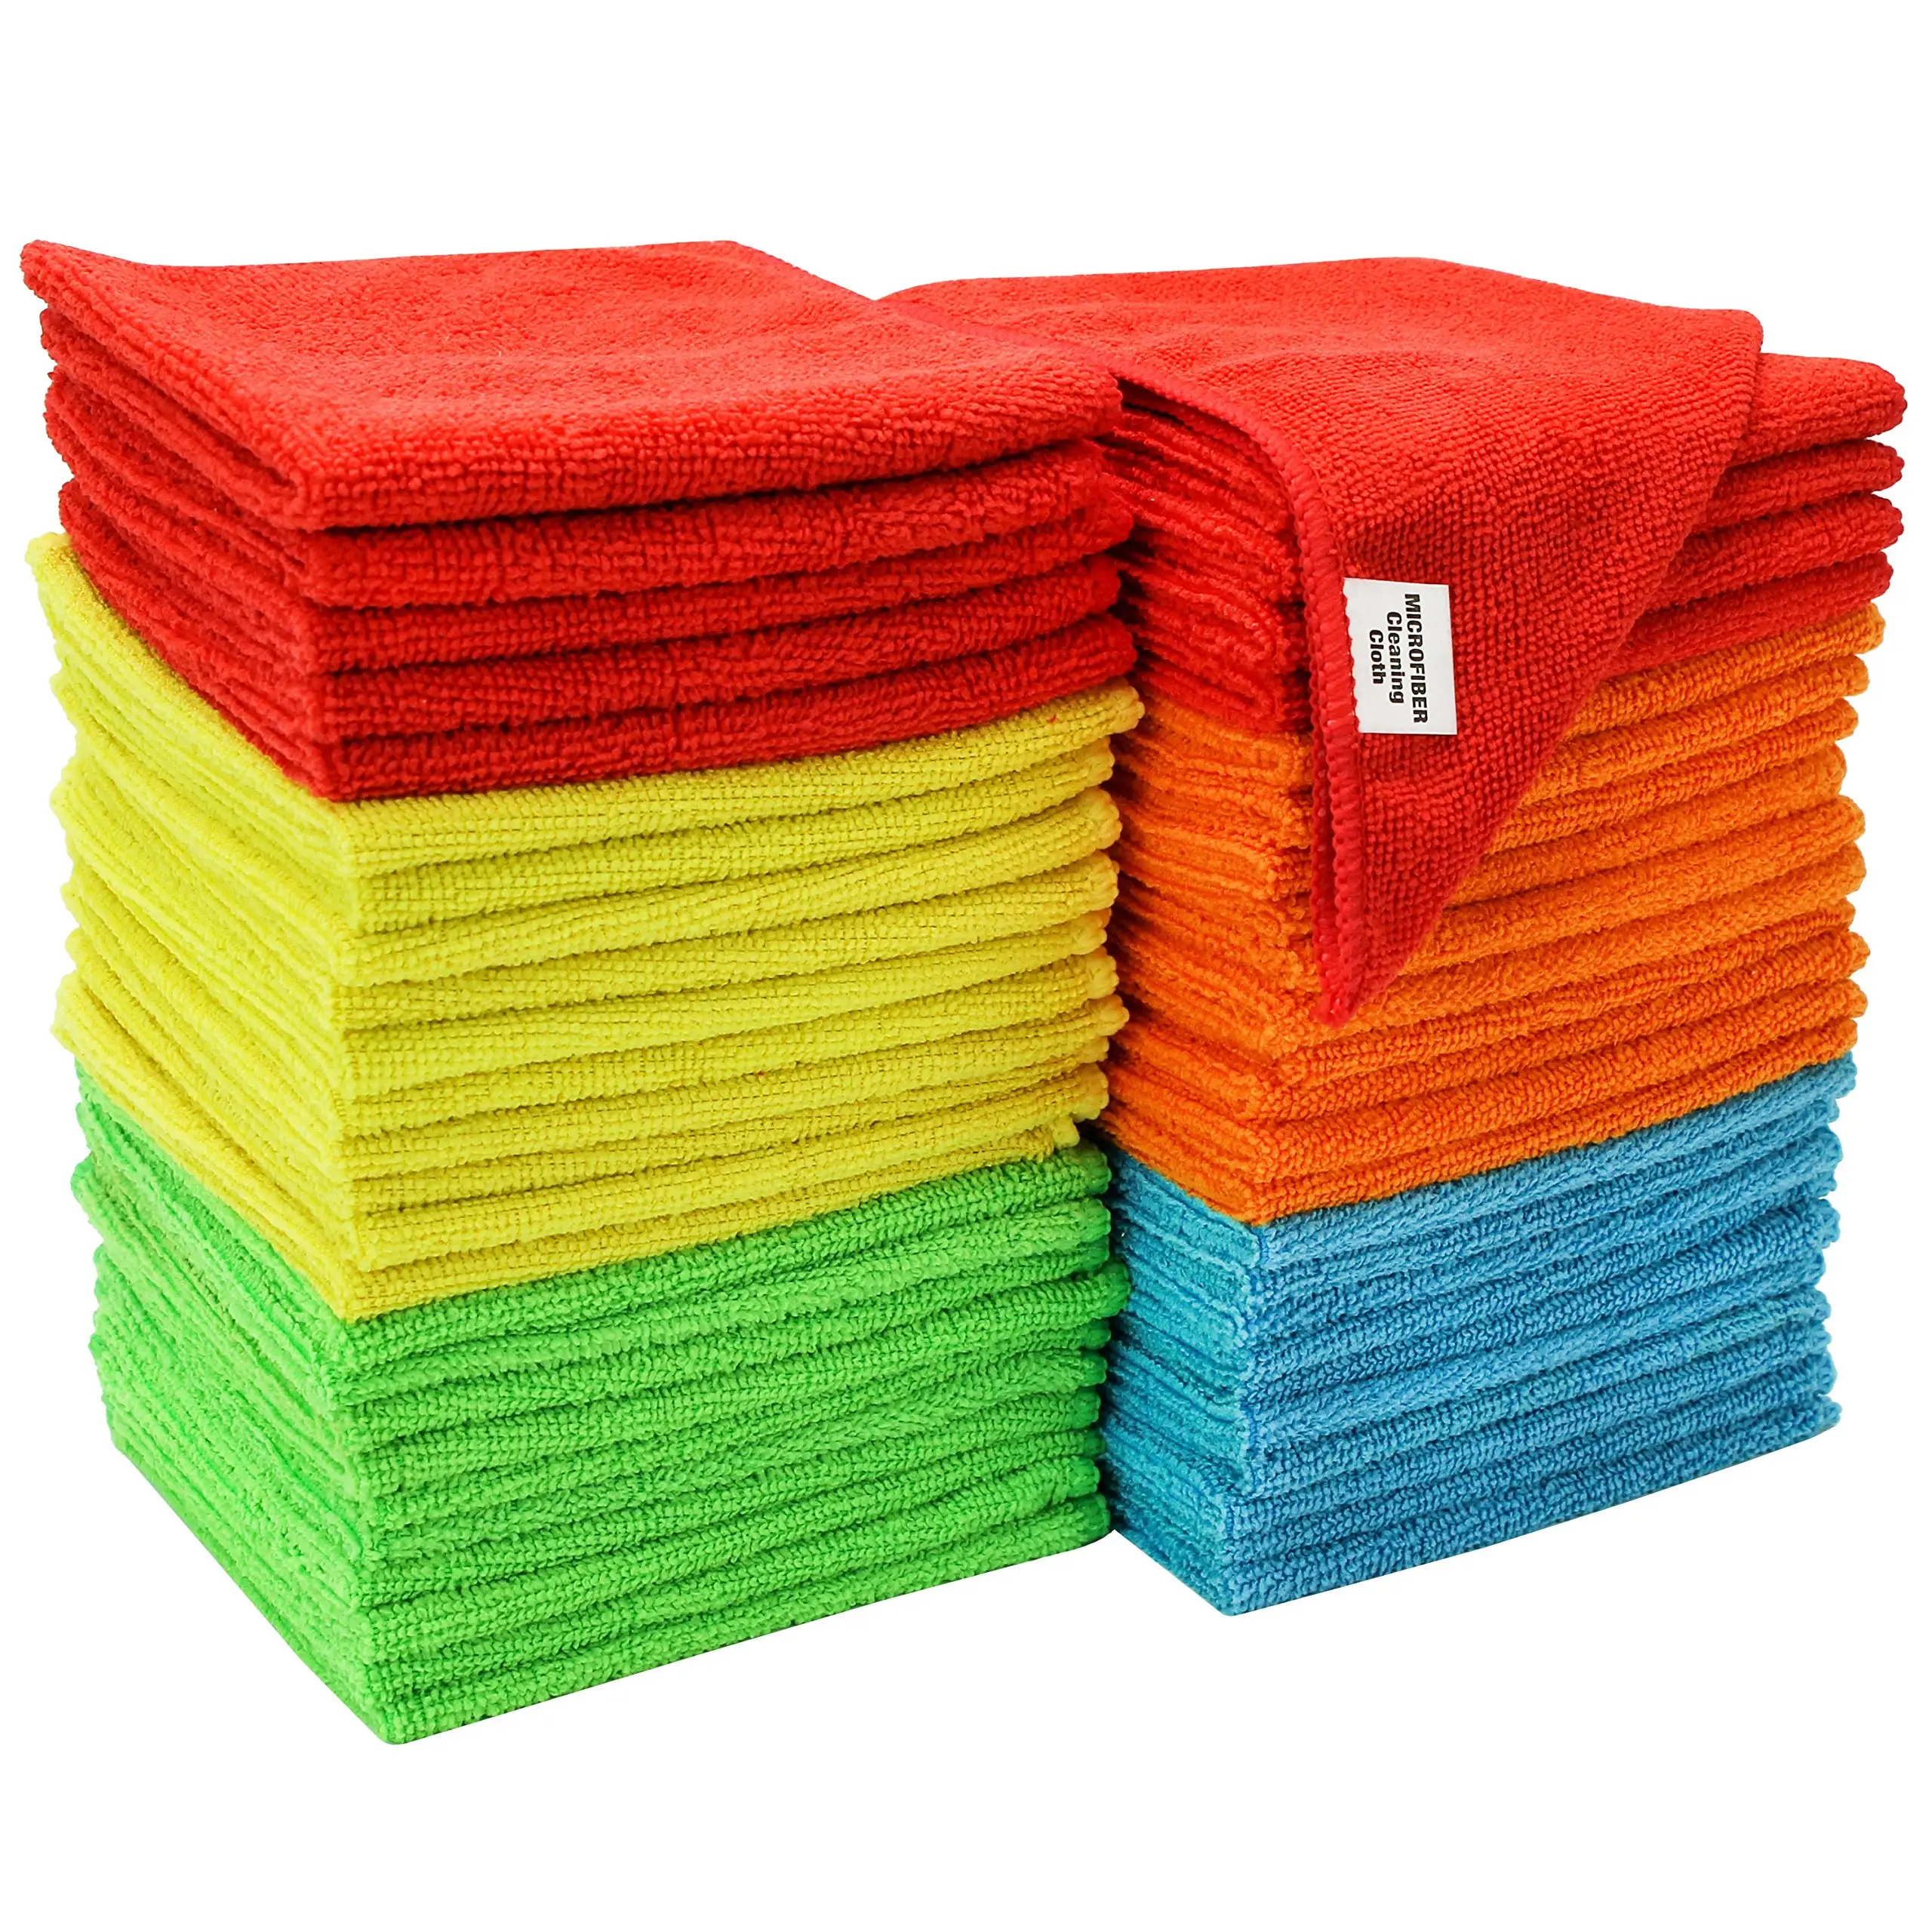 High Quality Microfiber 40*40cm Quick Drying Kitchen Cloth Towel Car Washing Cleaning Cloths Drying Cloth for Cleaning